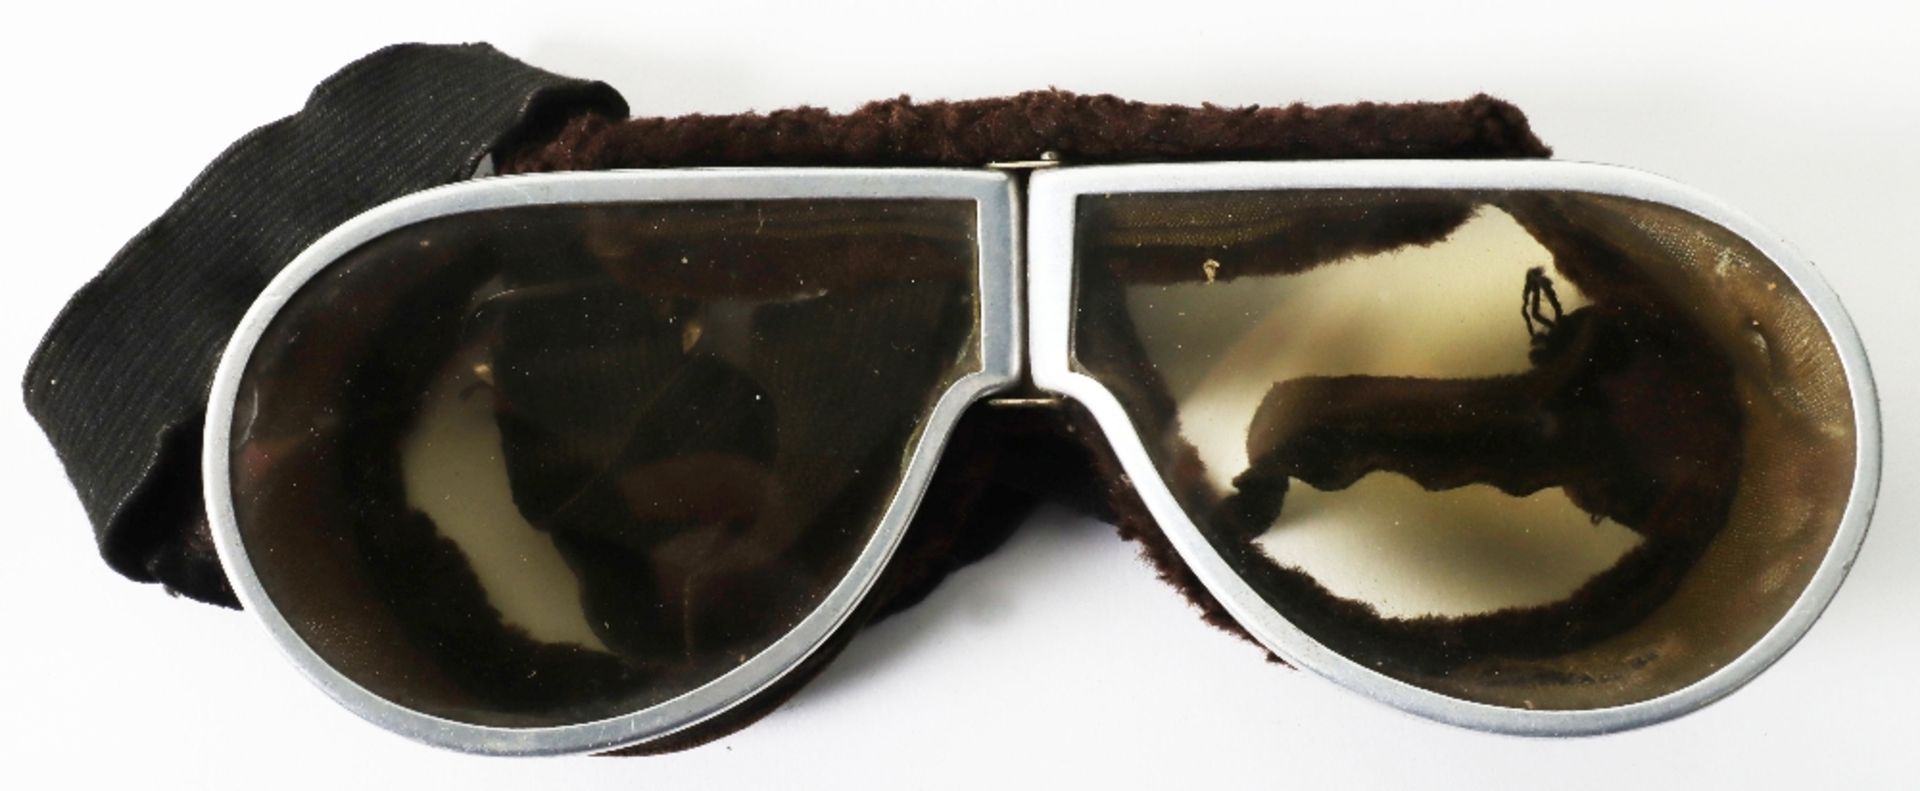 Five Pairs of Aviators Flying Goggles - Image 5 of 9